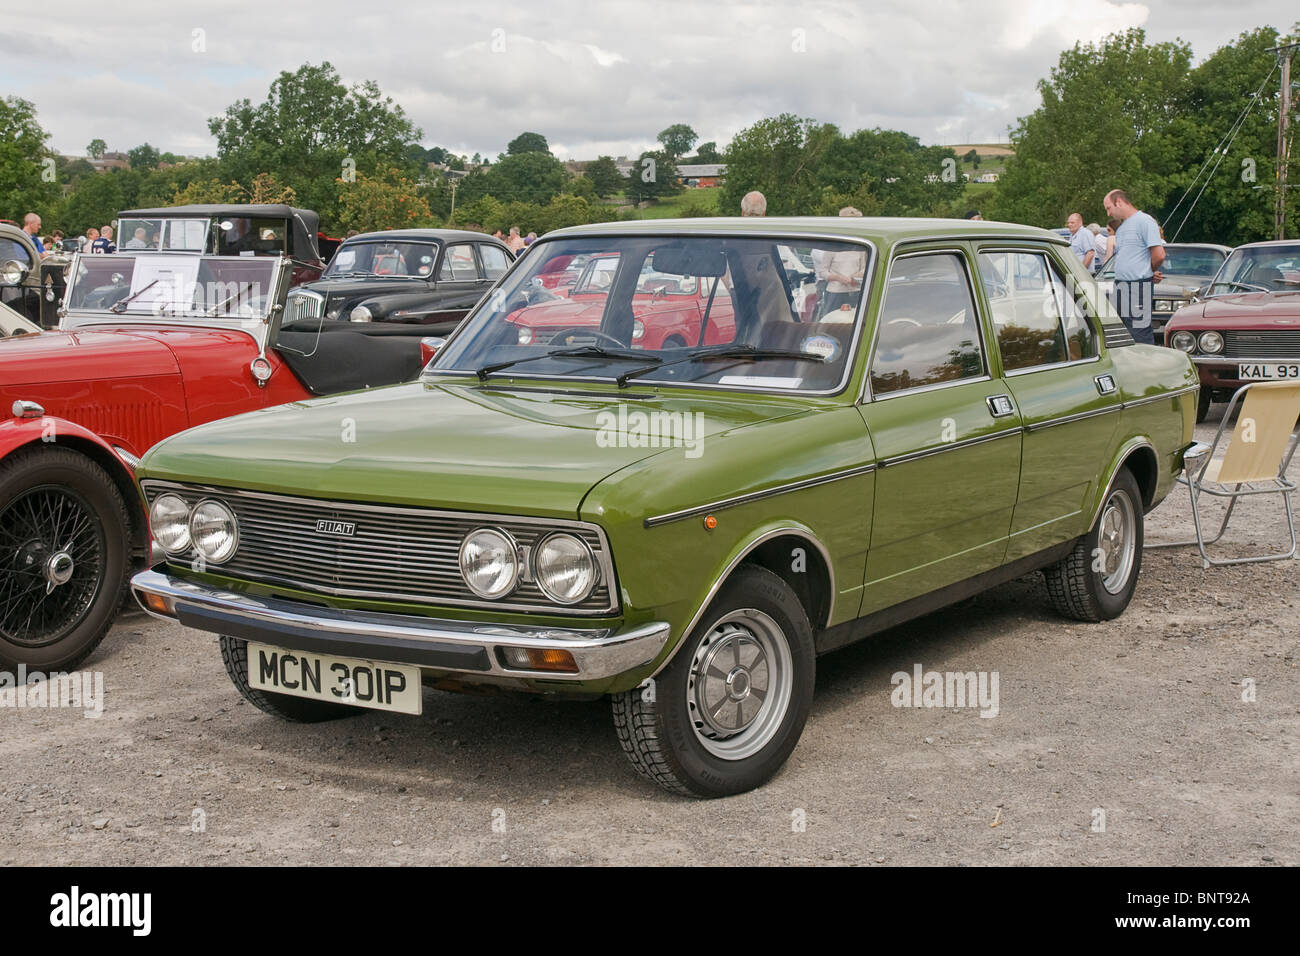 Fiat 132 motor car at a classic car rally in Yorkshire Stock Photo